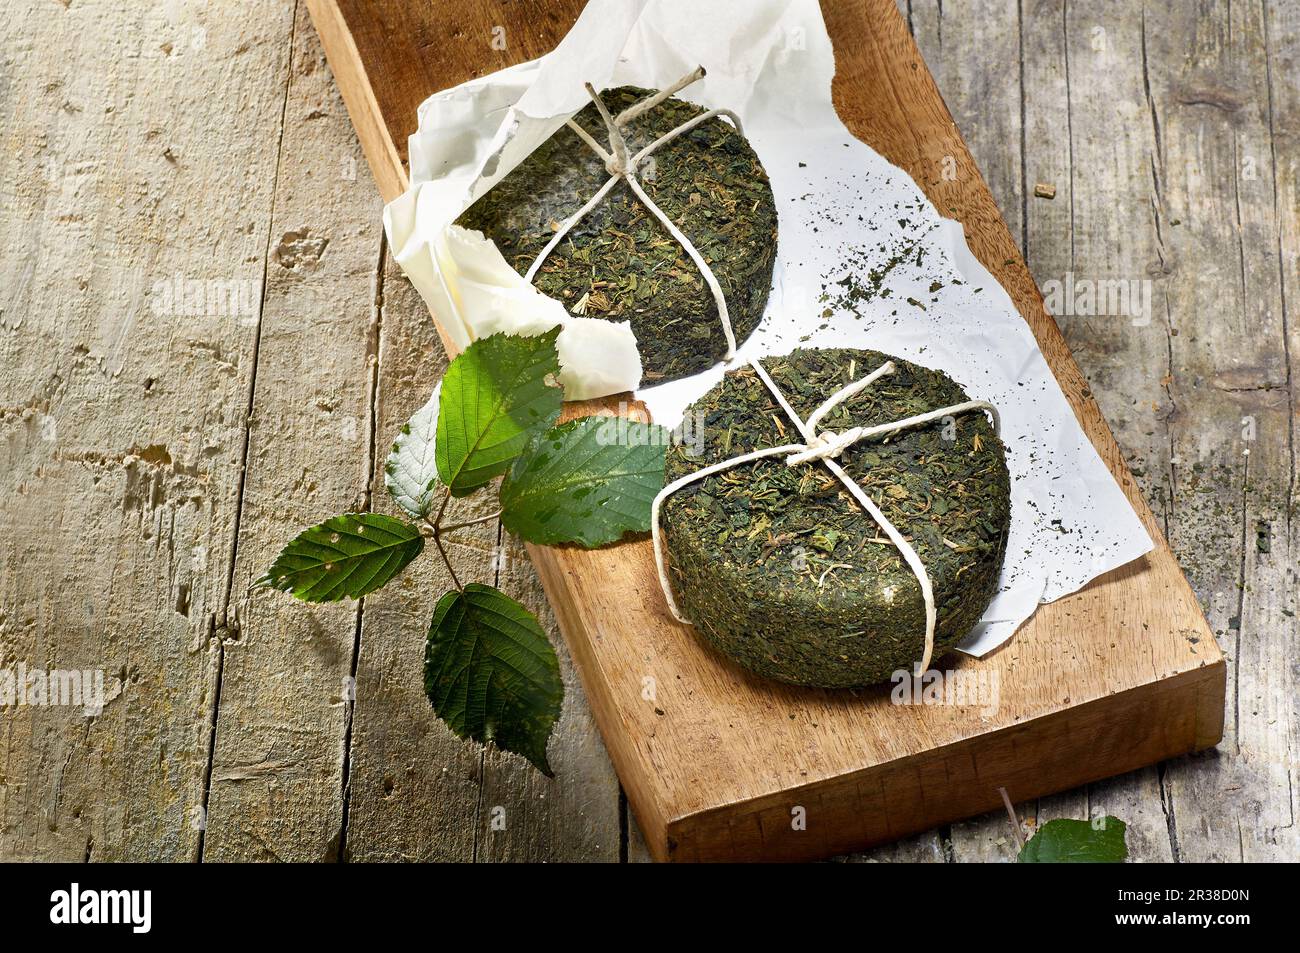 Two pecorino cheeses with stinging nettle rind on a wooden board Stock Photo